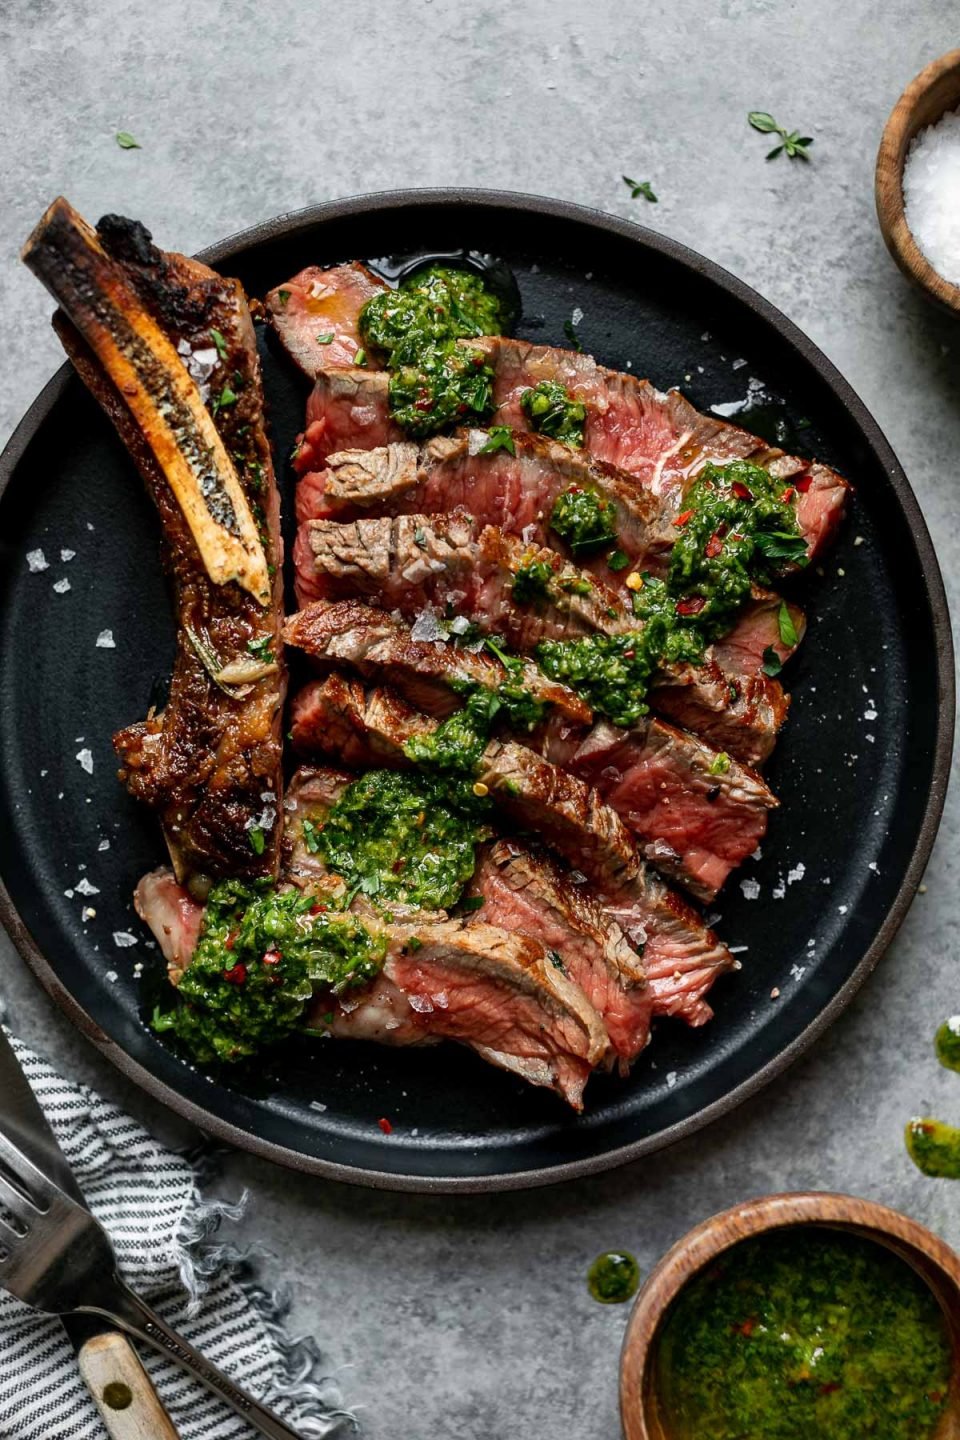 Cooked cast iron steak shown on a small black plate. The steak is sliced off the bone, showing a medium-rare interior, and topped with chimichurri. The plate is placed atop a light gray surface, next to a bowl of flaky salt, a striped linen napkin and a fork and steak knife.